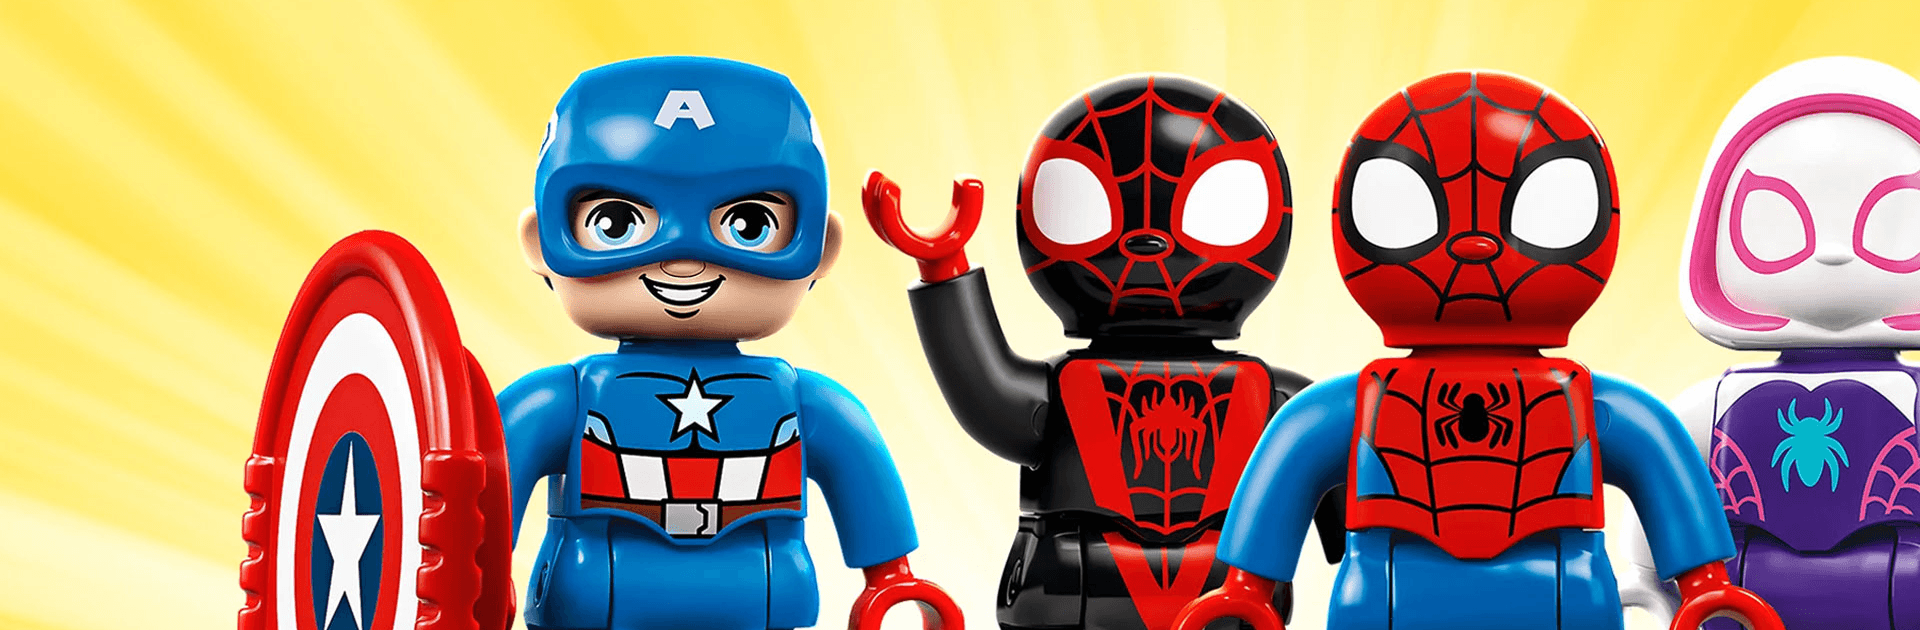 LEGO ® Marvel Super Heroes - Apps on Google Play